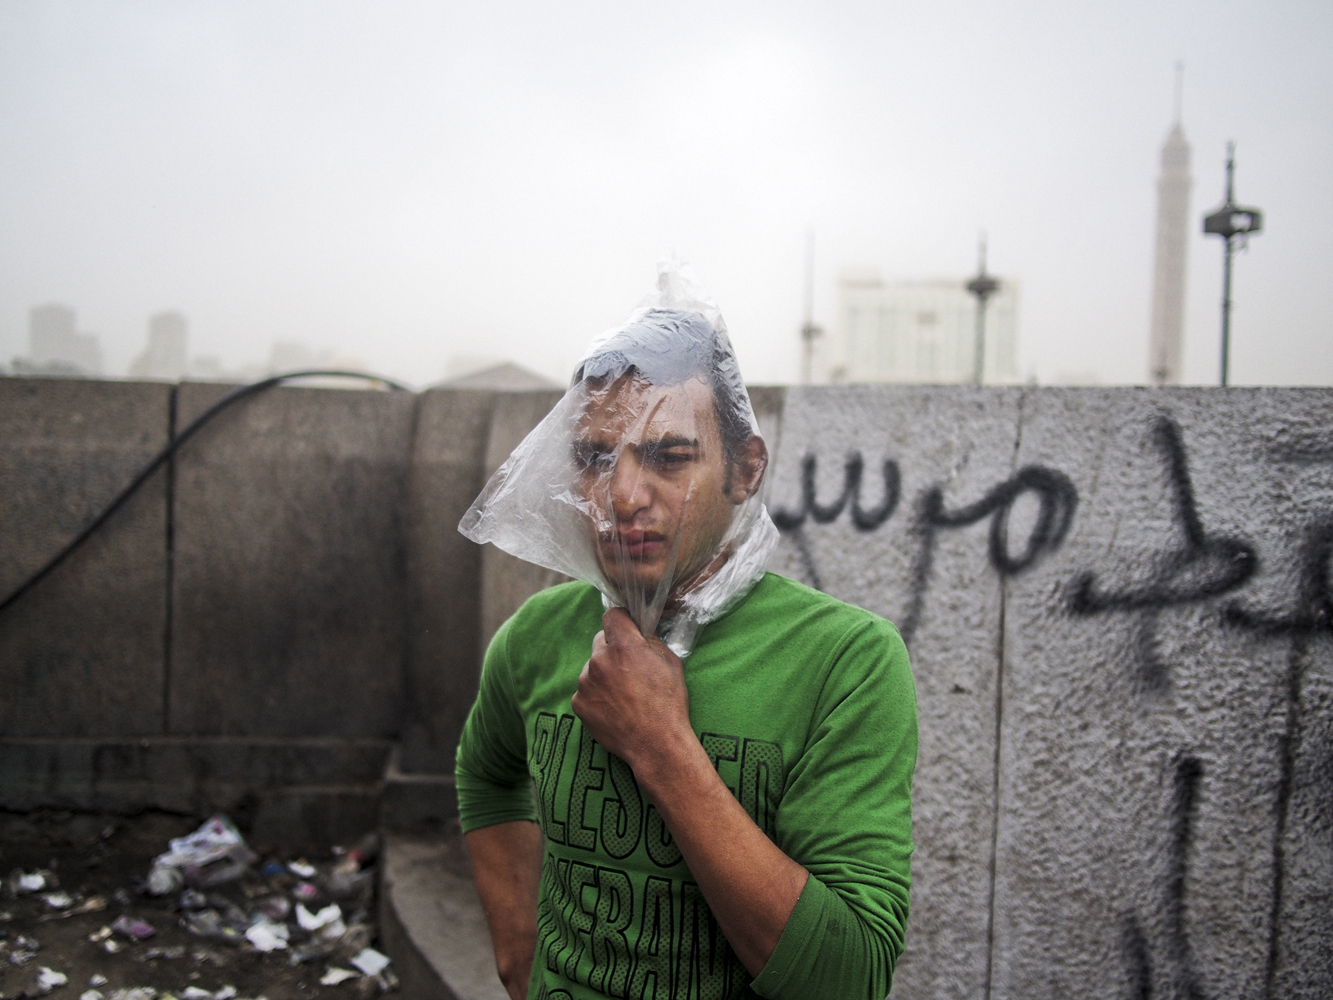 EGYPT. Cairo. January 28, 2013. A protestors covers his head with a plastic bag as a makeshift gas mask during clashes near Tahrir Square.